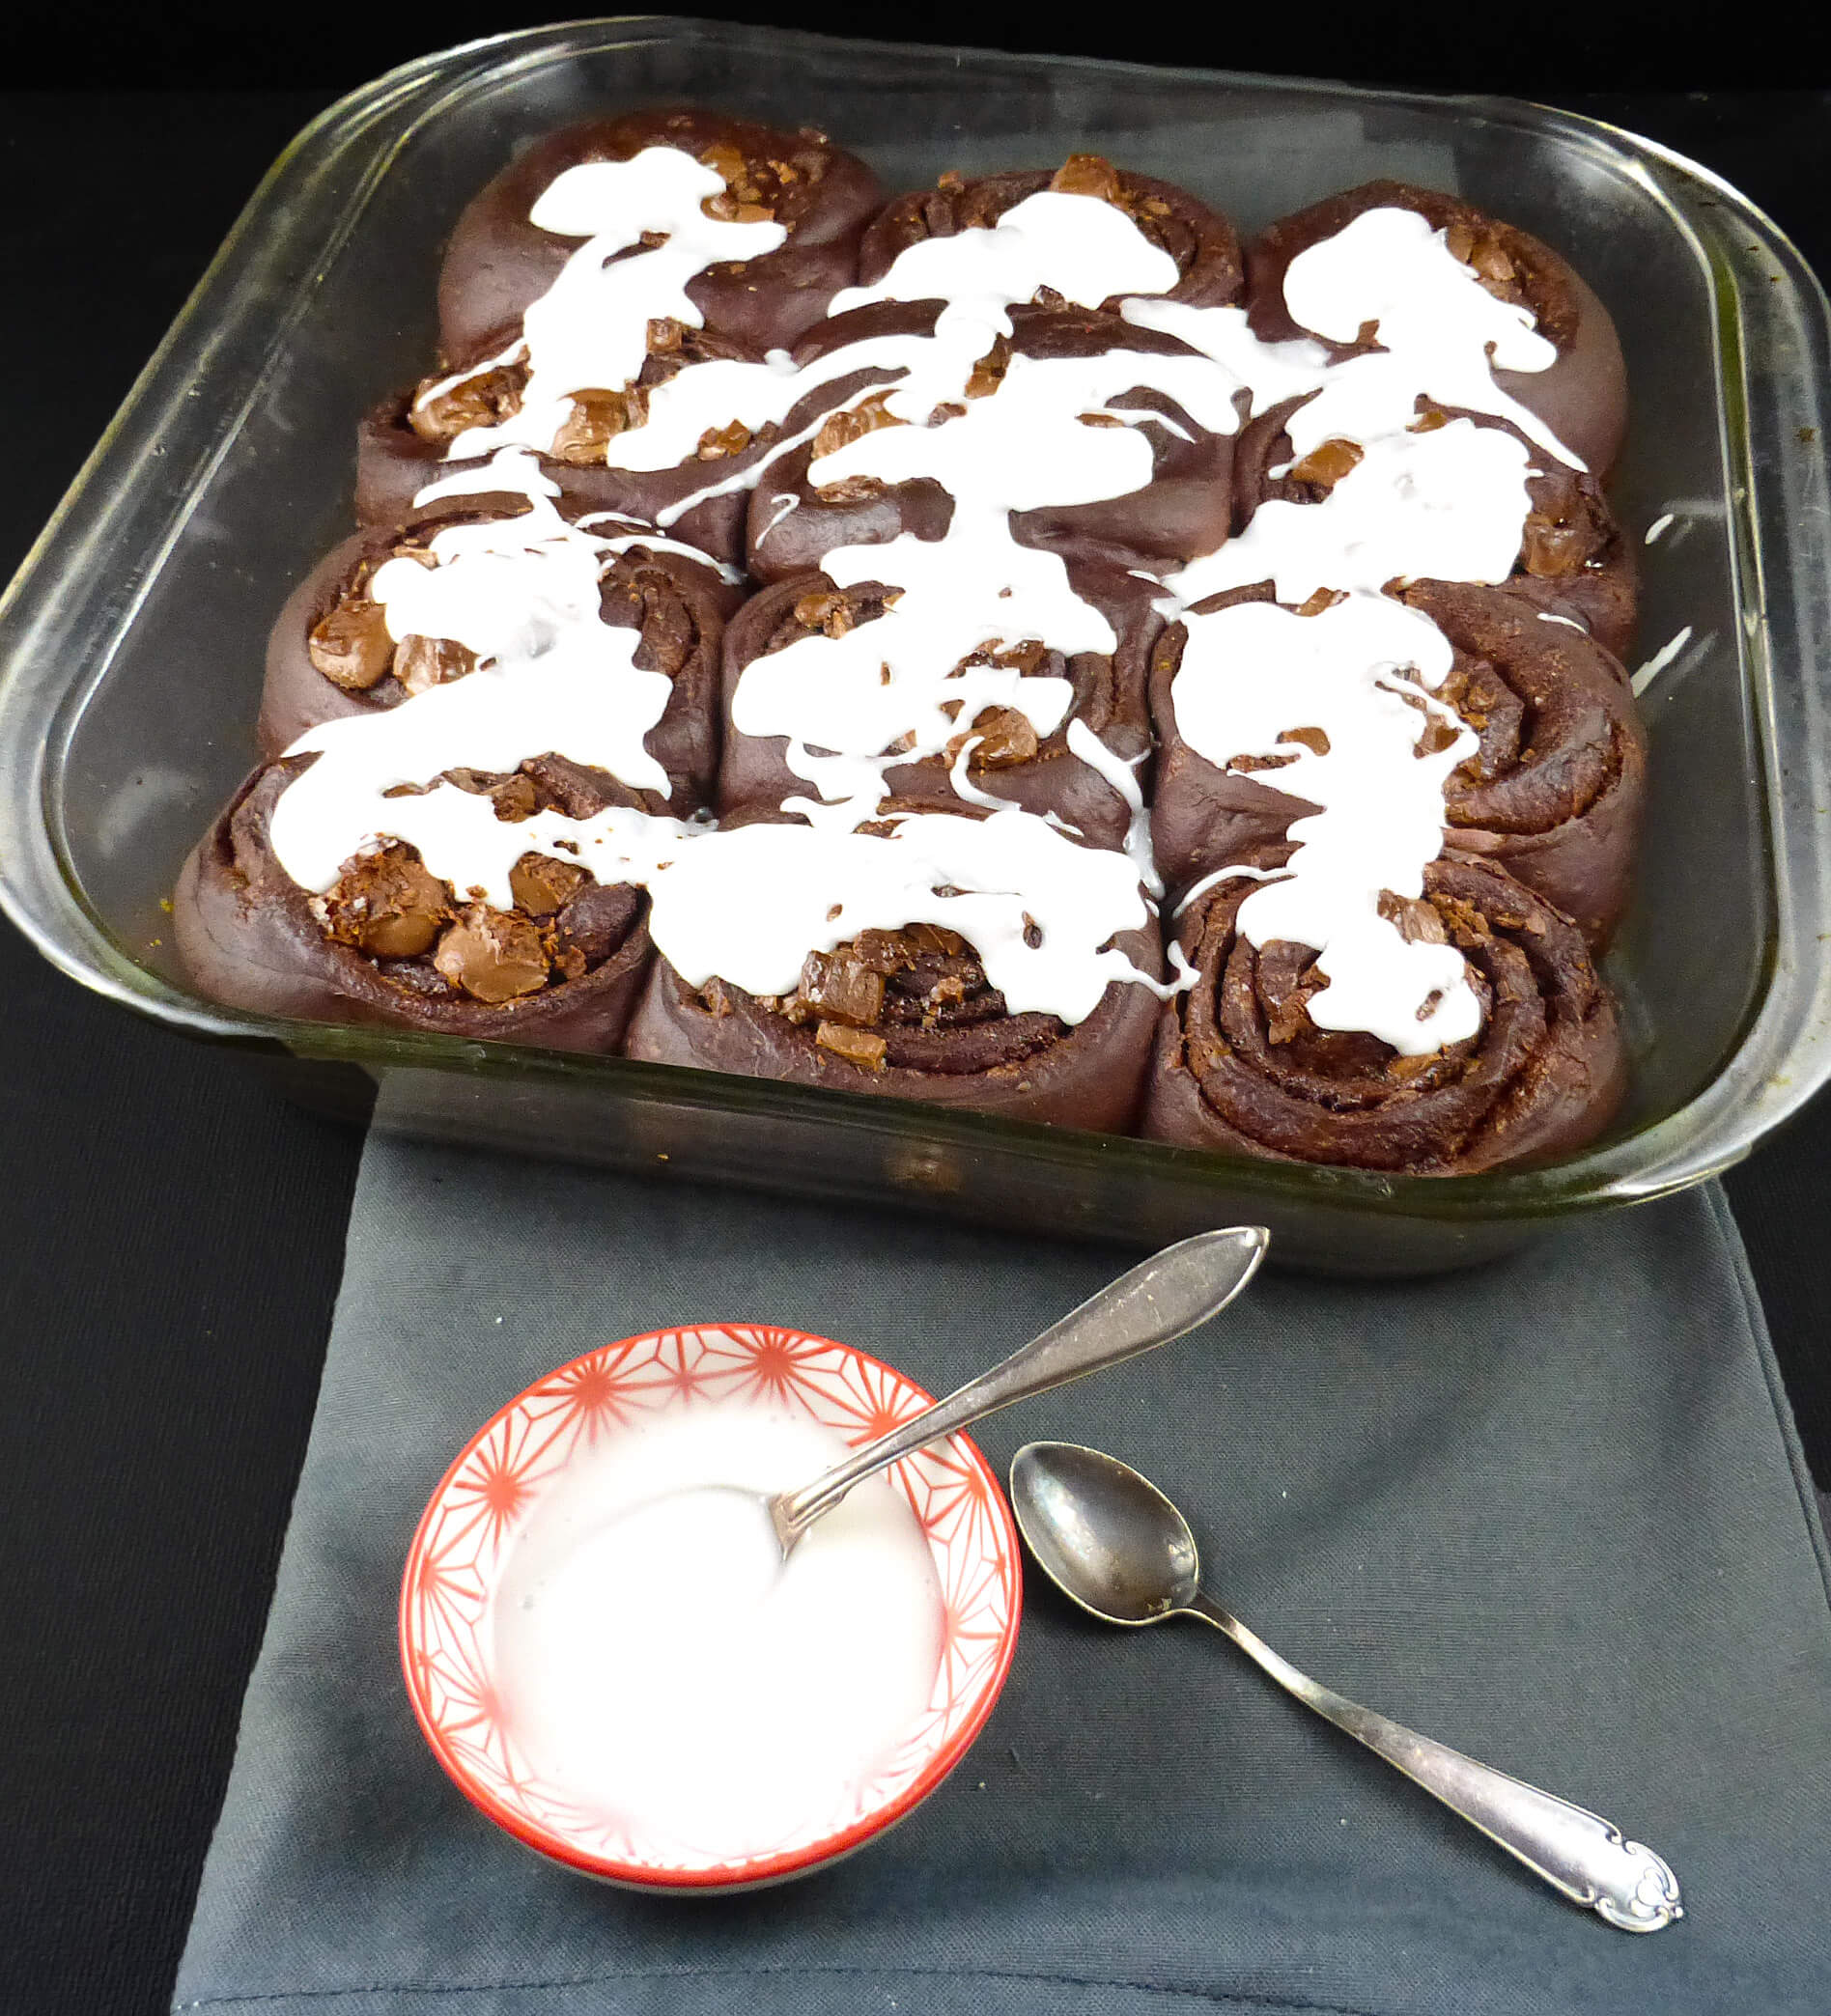 a picture of chocolate cinnamon buns with a white frosting